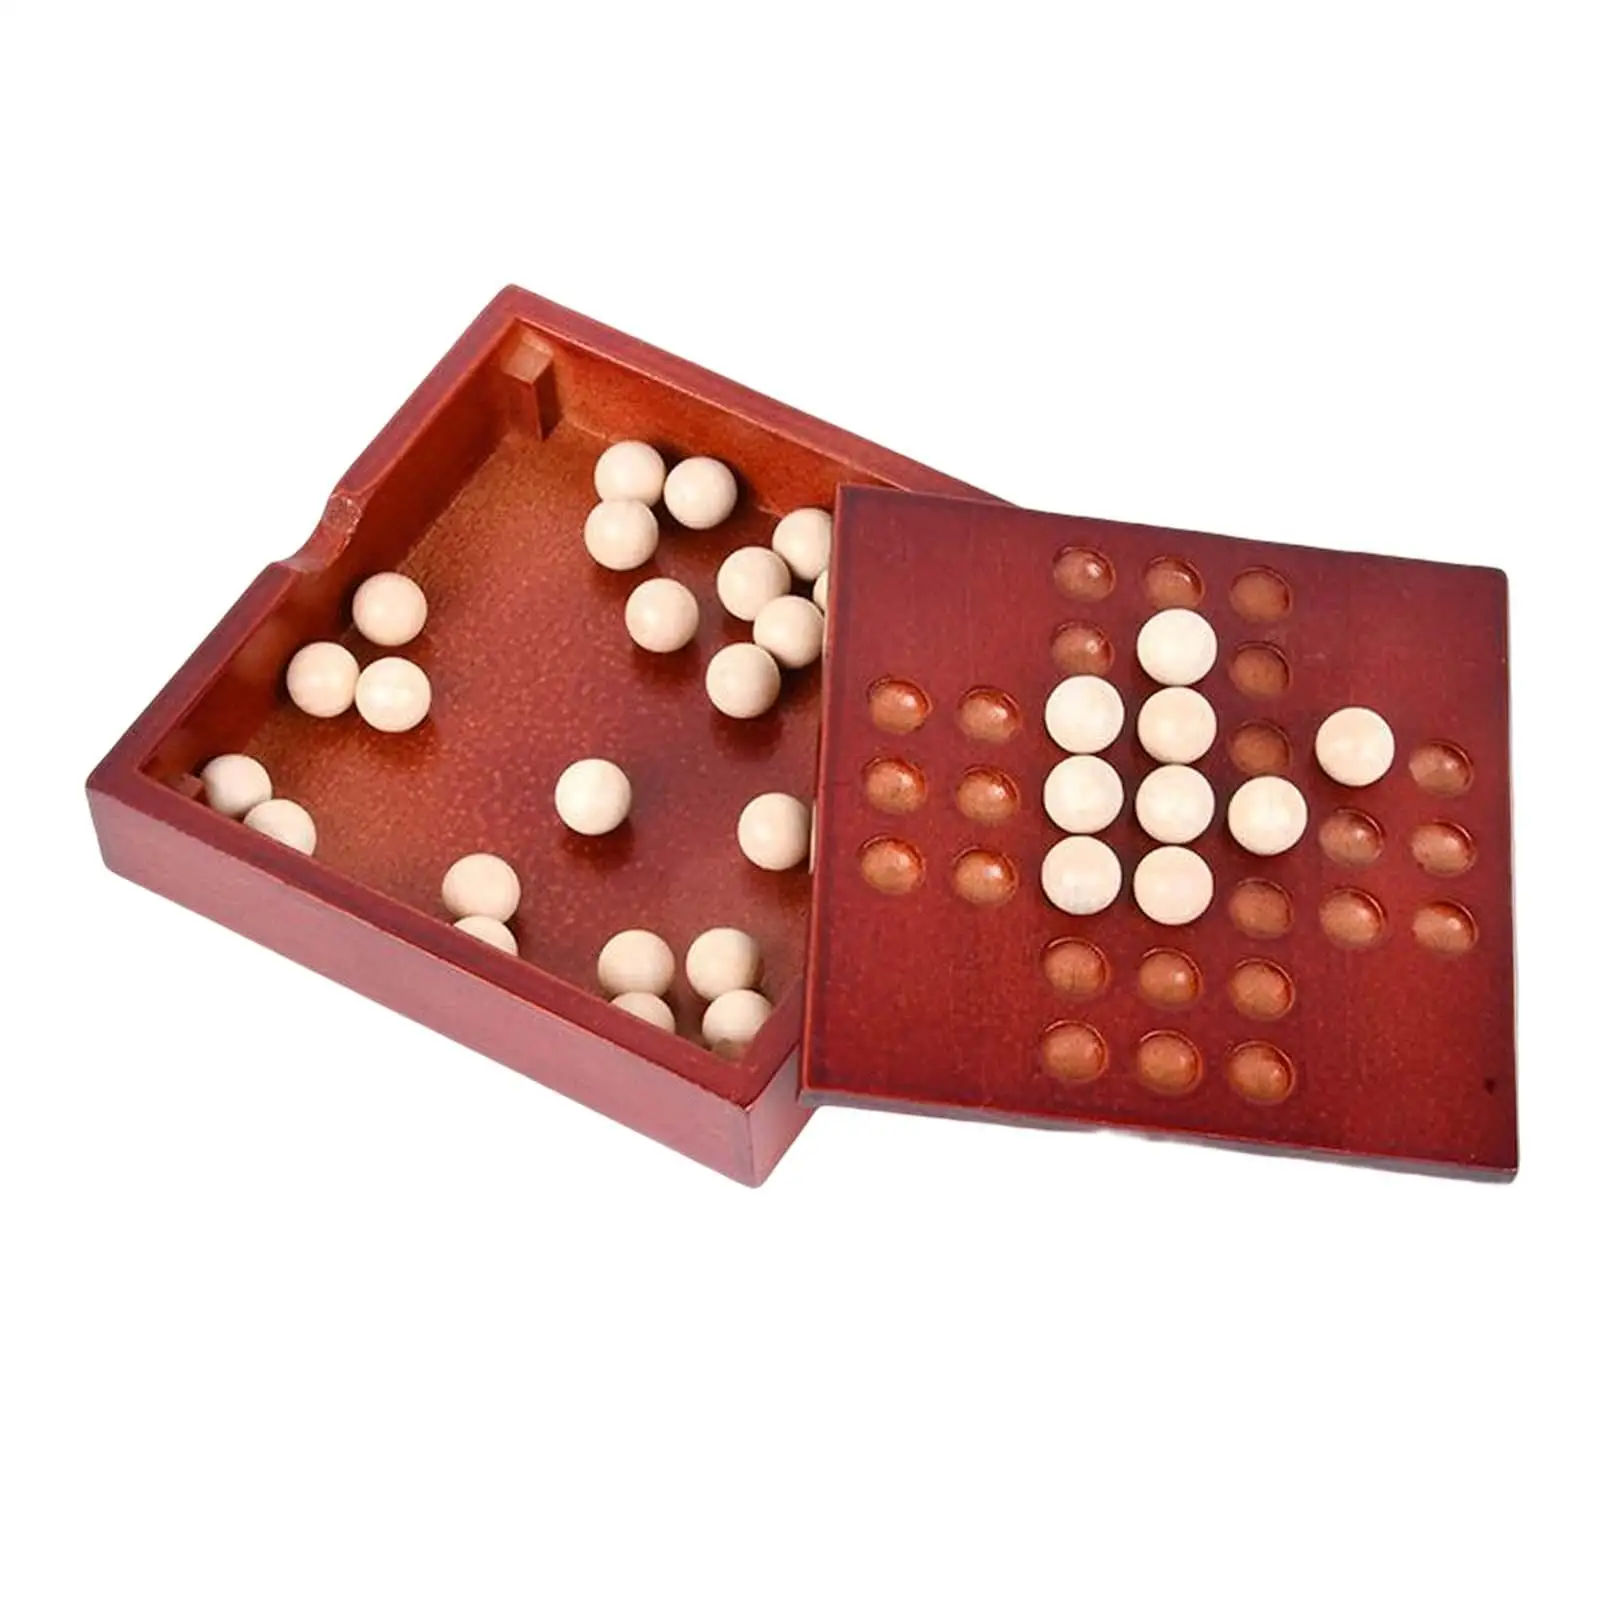 Classical Puzzle Toy Wooden Living Room Decor Brain Teaser Party Games IQ Puzzle Solitaire Board Game for Holiday Birthday Gifts